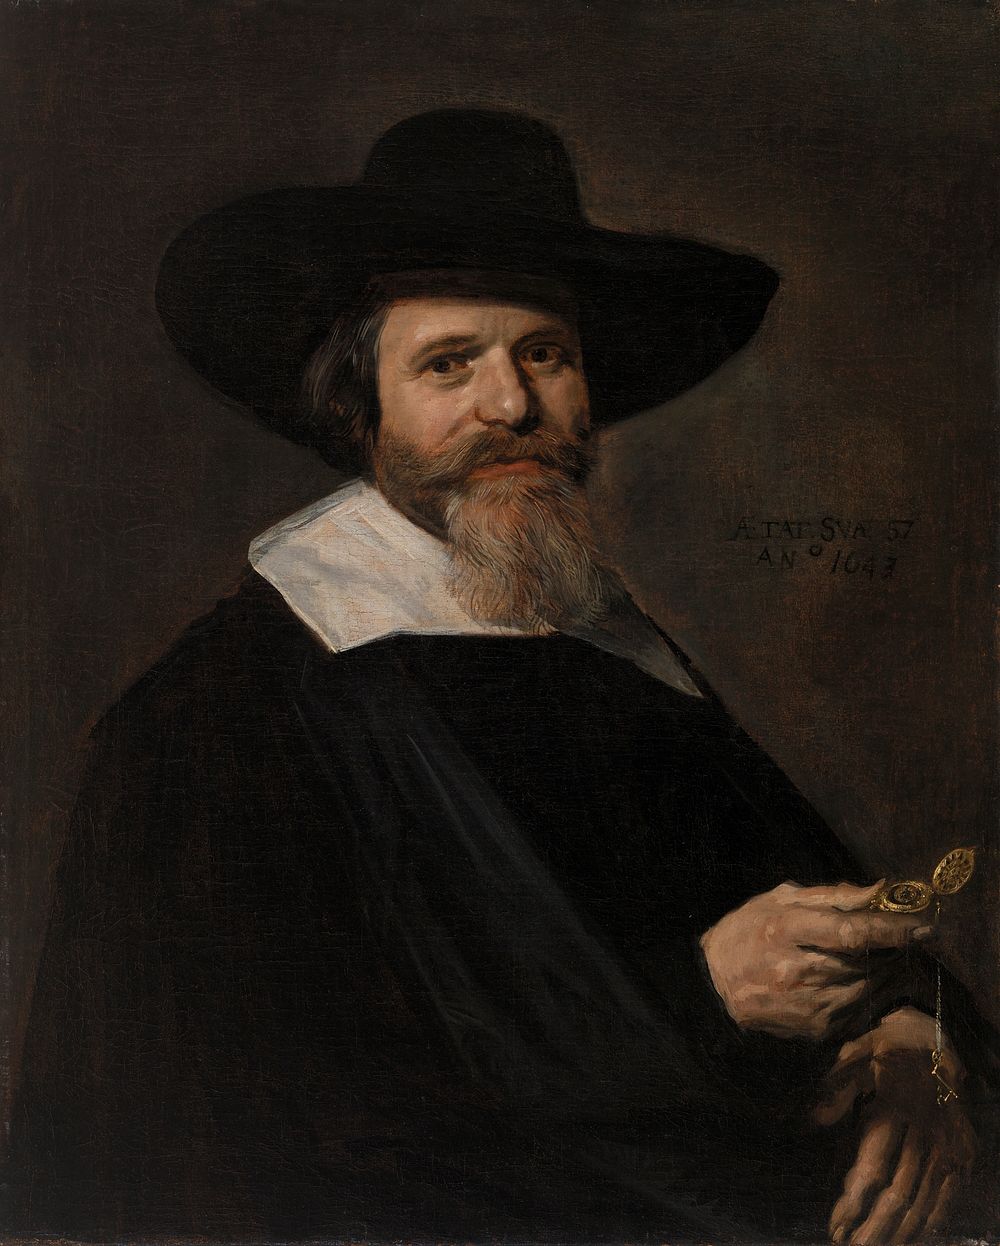 Portrait of a Man Holding a Watch by Frans Hals